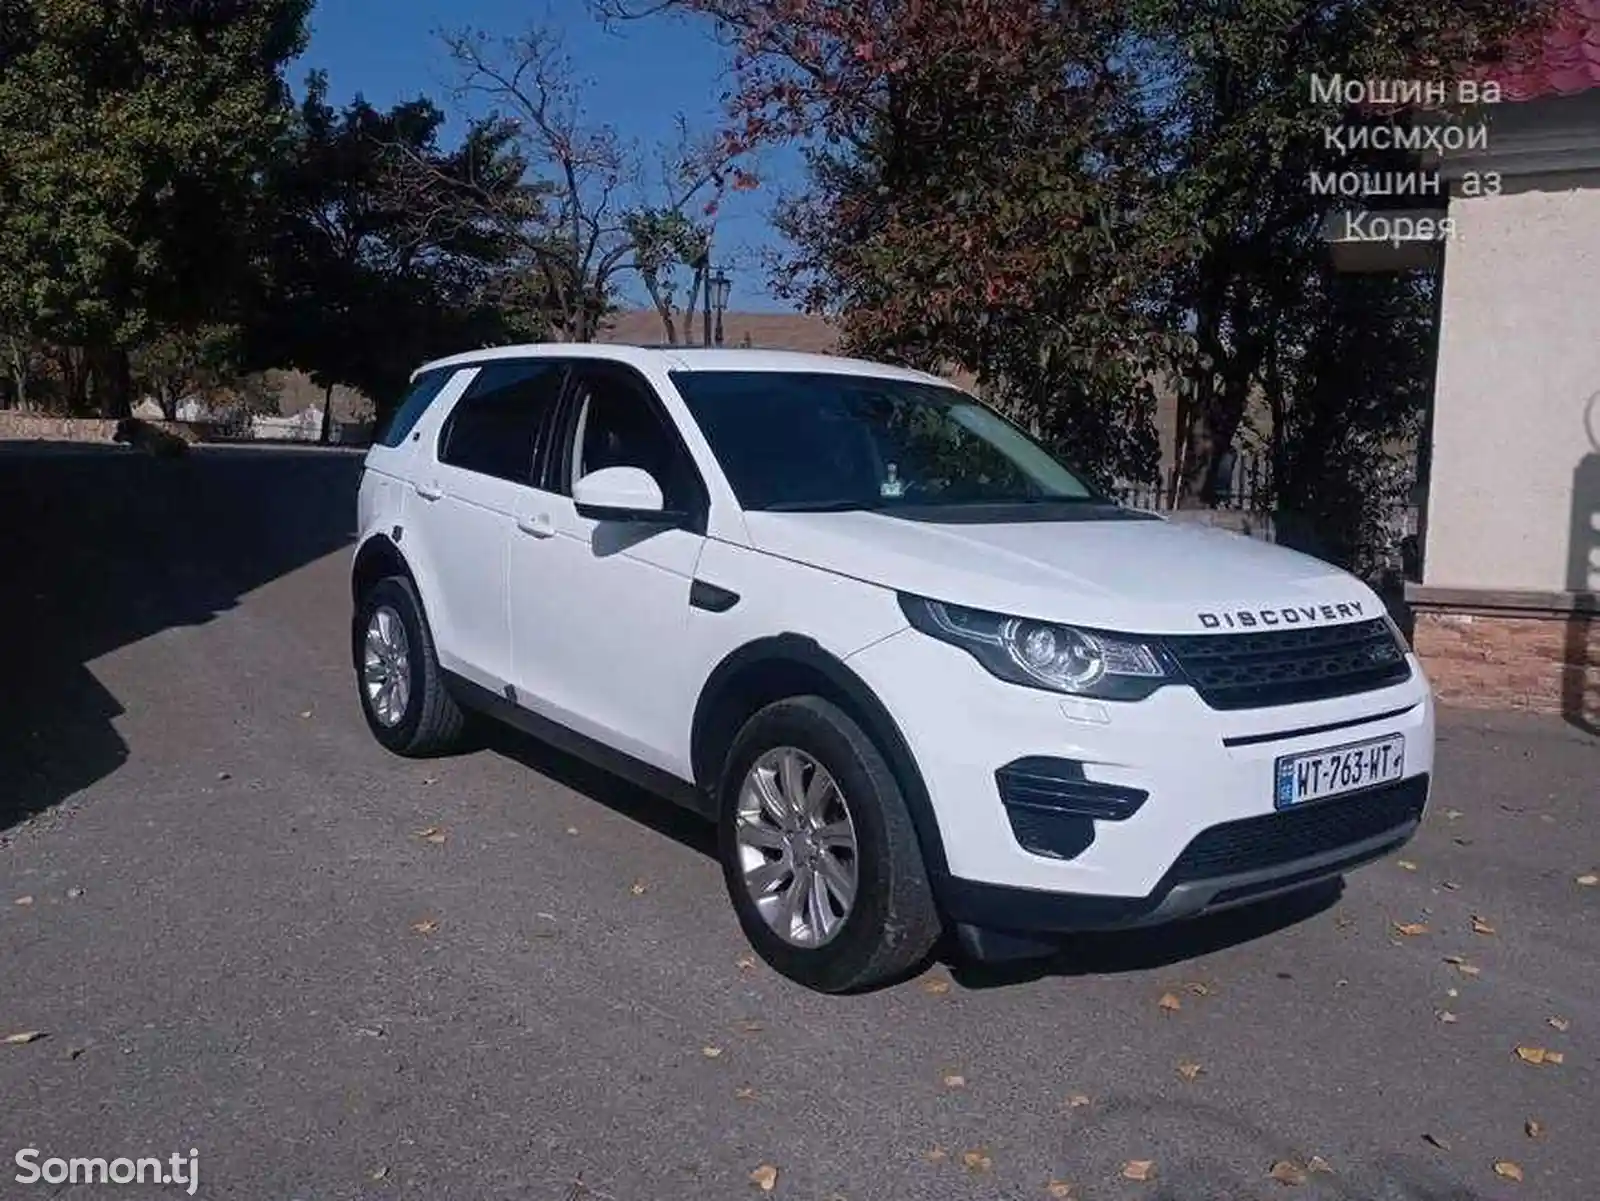 Land Rover Discovery, 2016-8